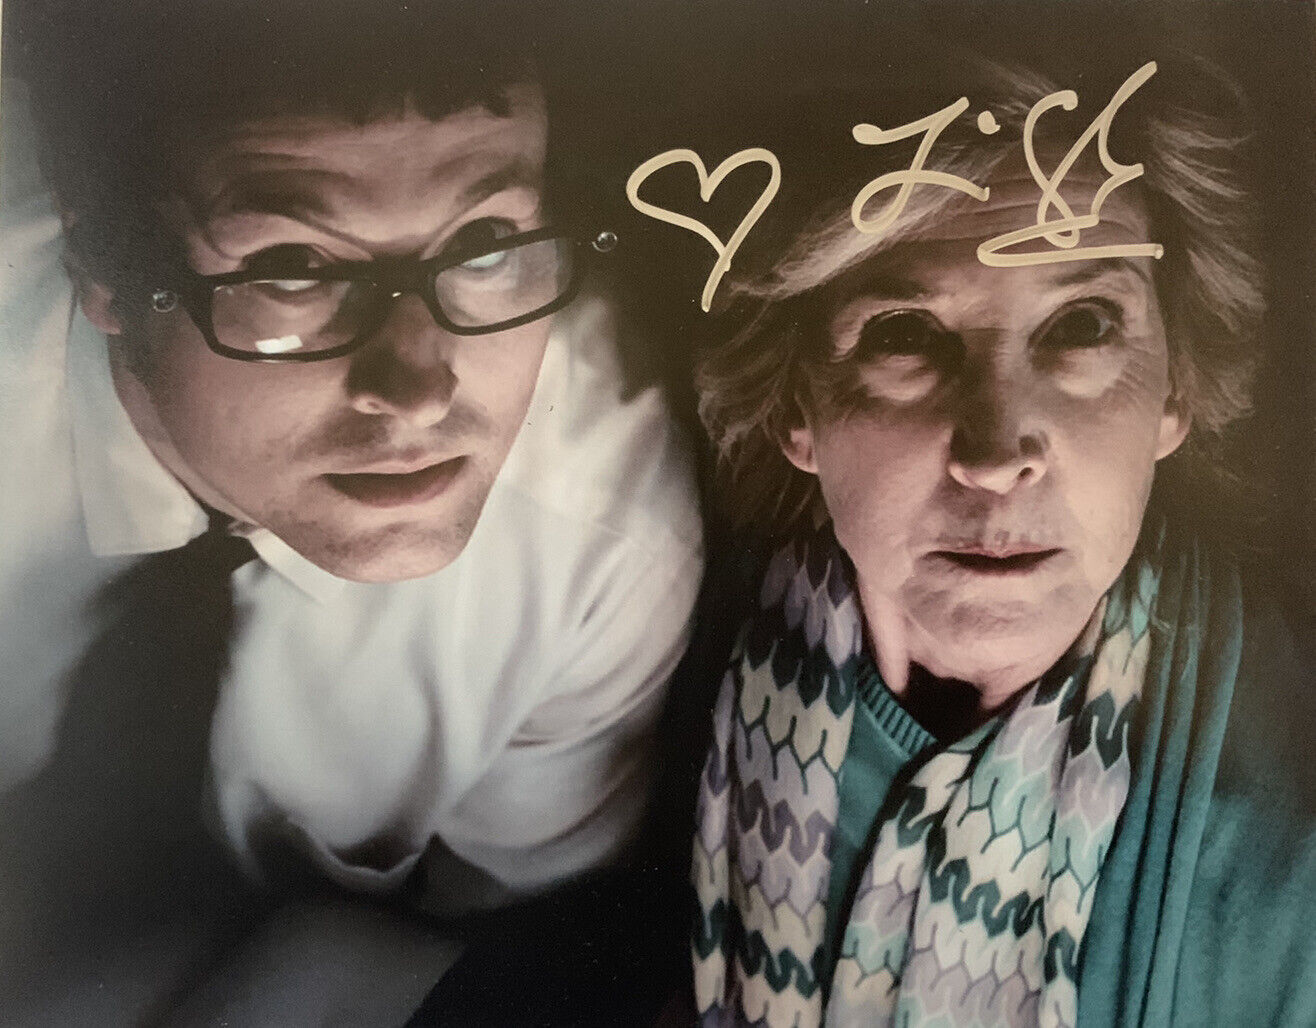 LIN SHAYE HAND SIGNED 8x10 Photo Poster painting INSIDIOUS HORROR MOVIE AUTOGRAPH AUTHENTIC